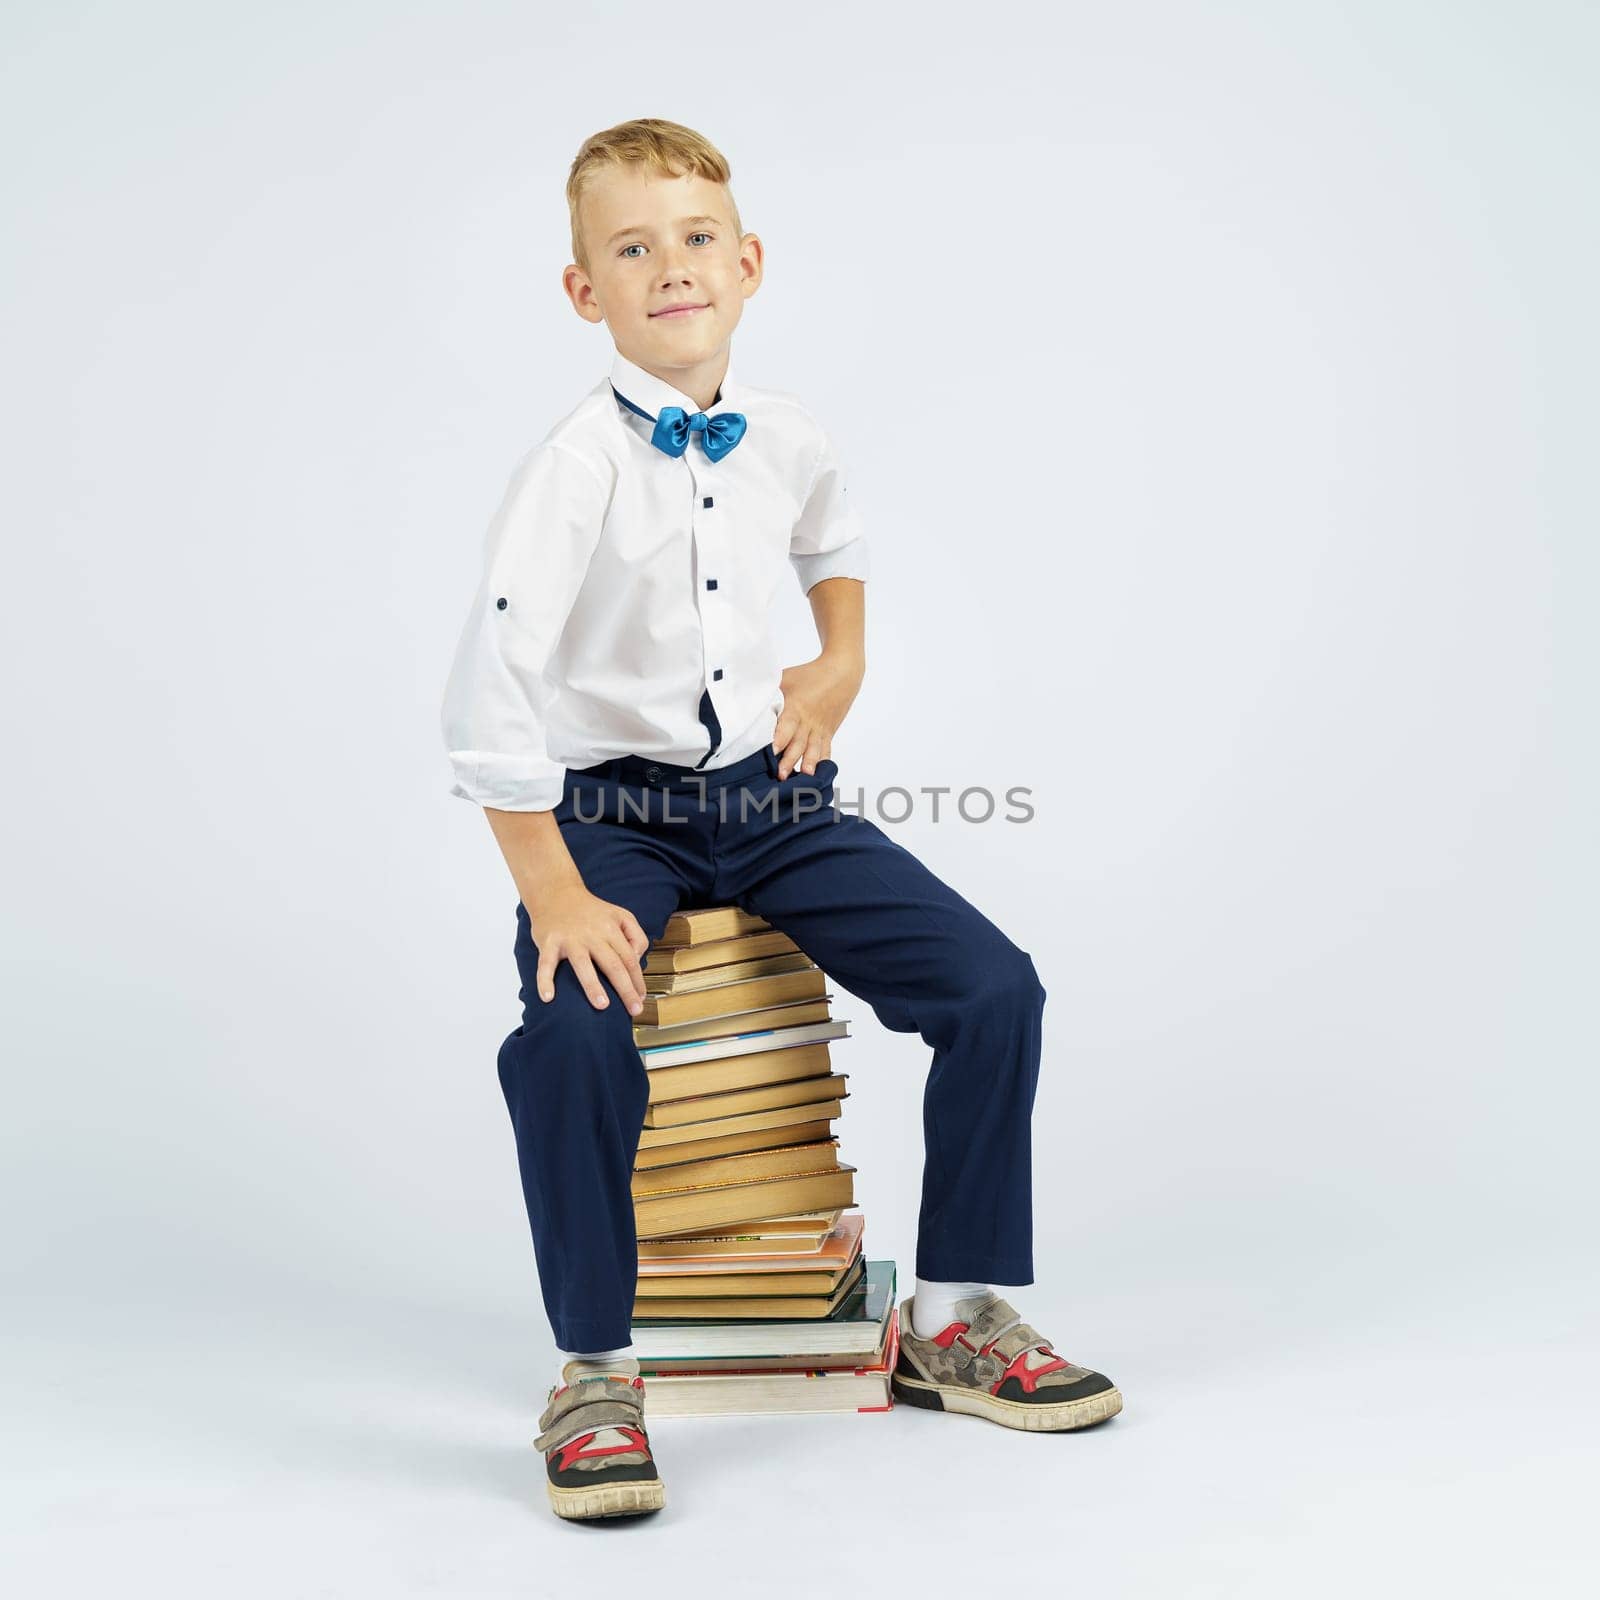 The schoolboy is sitting on books. Isolated background.